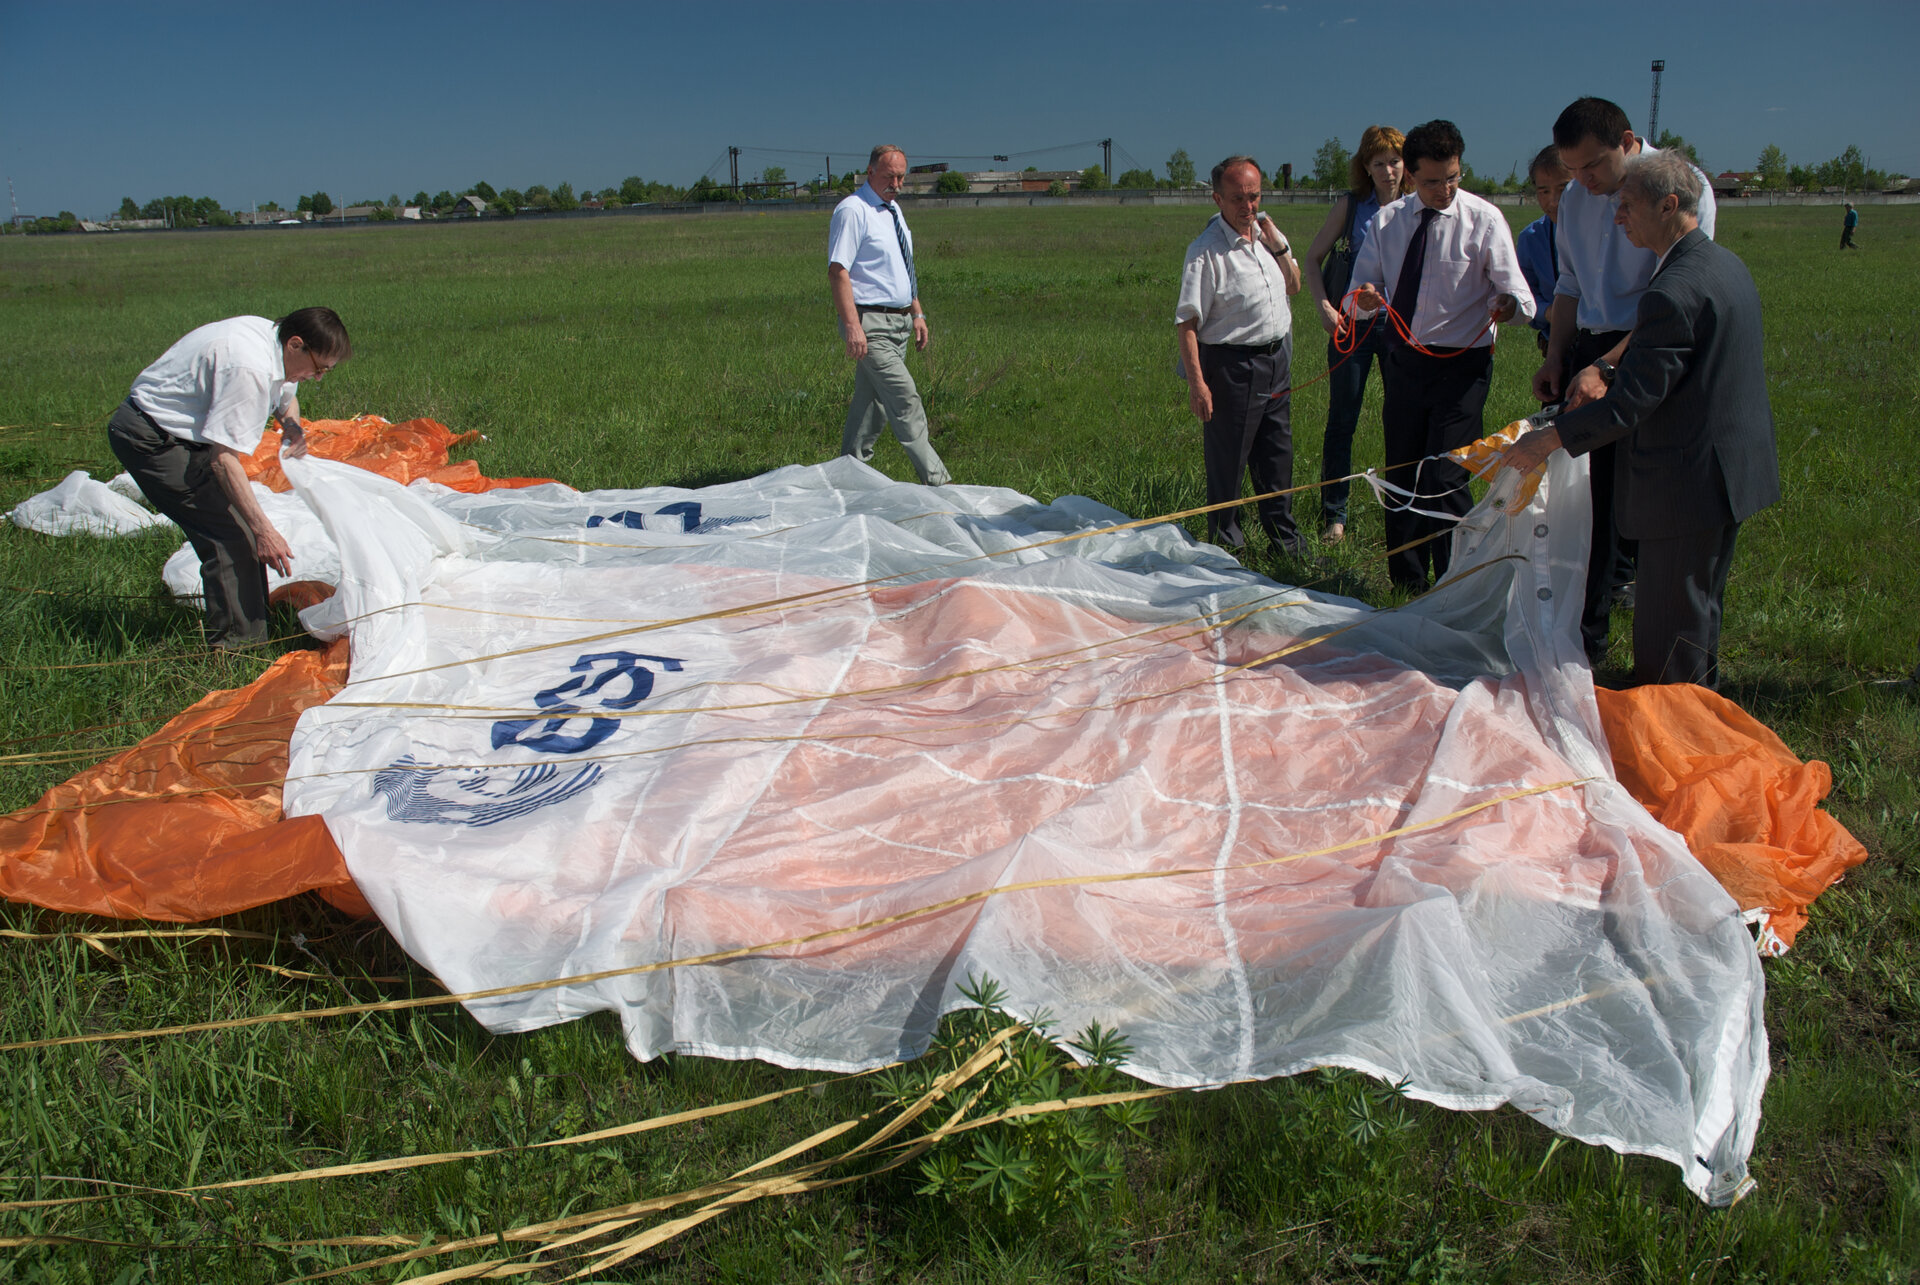 Inspection of the main parachute after landing